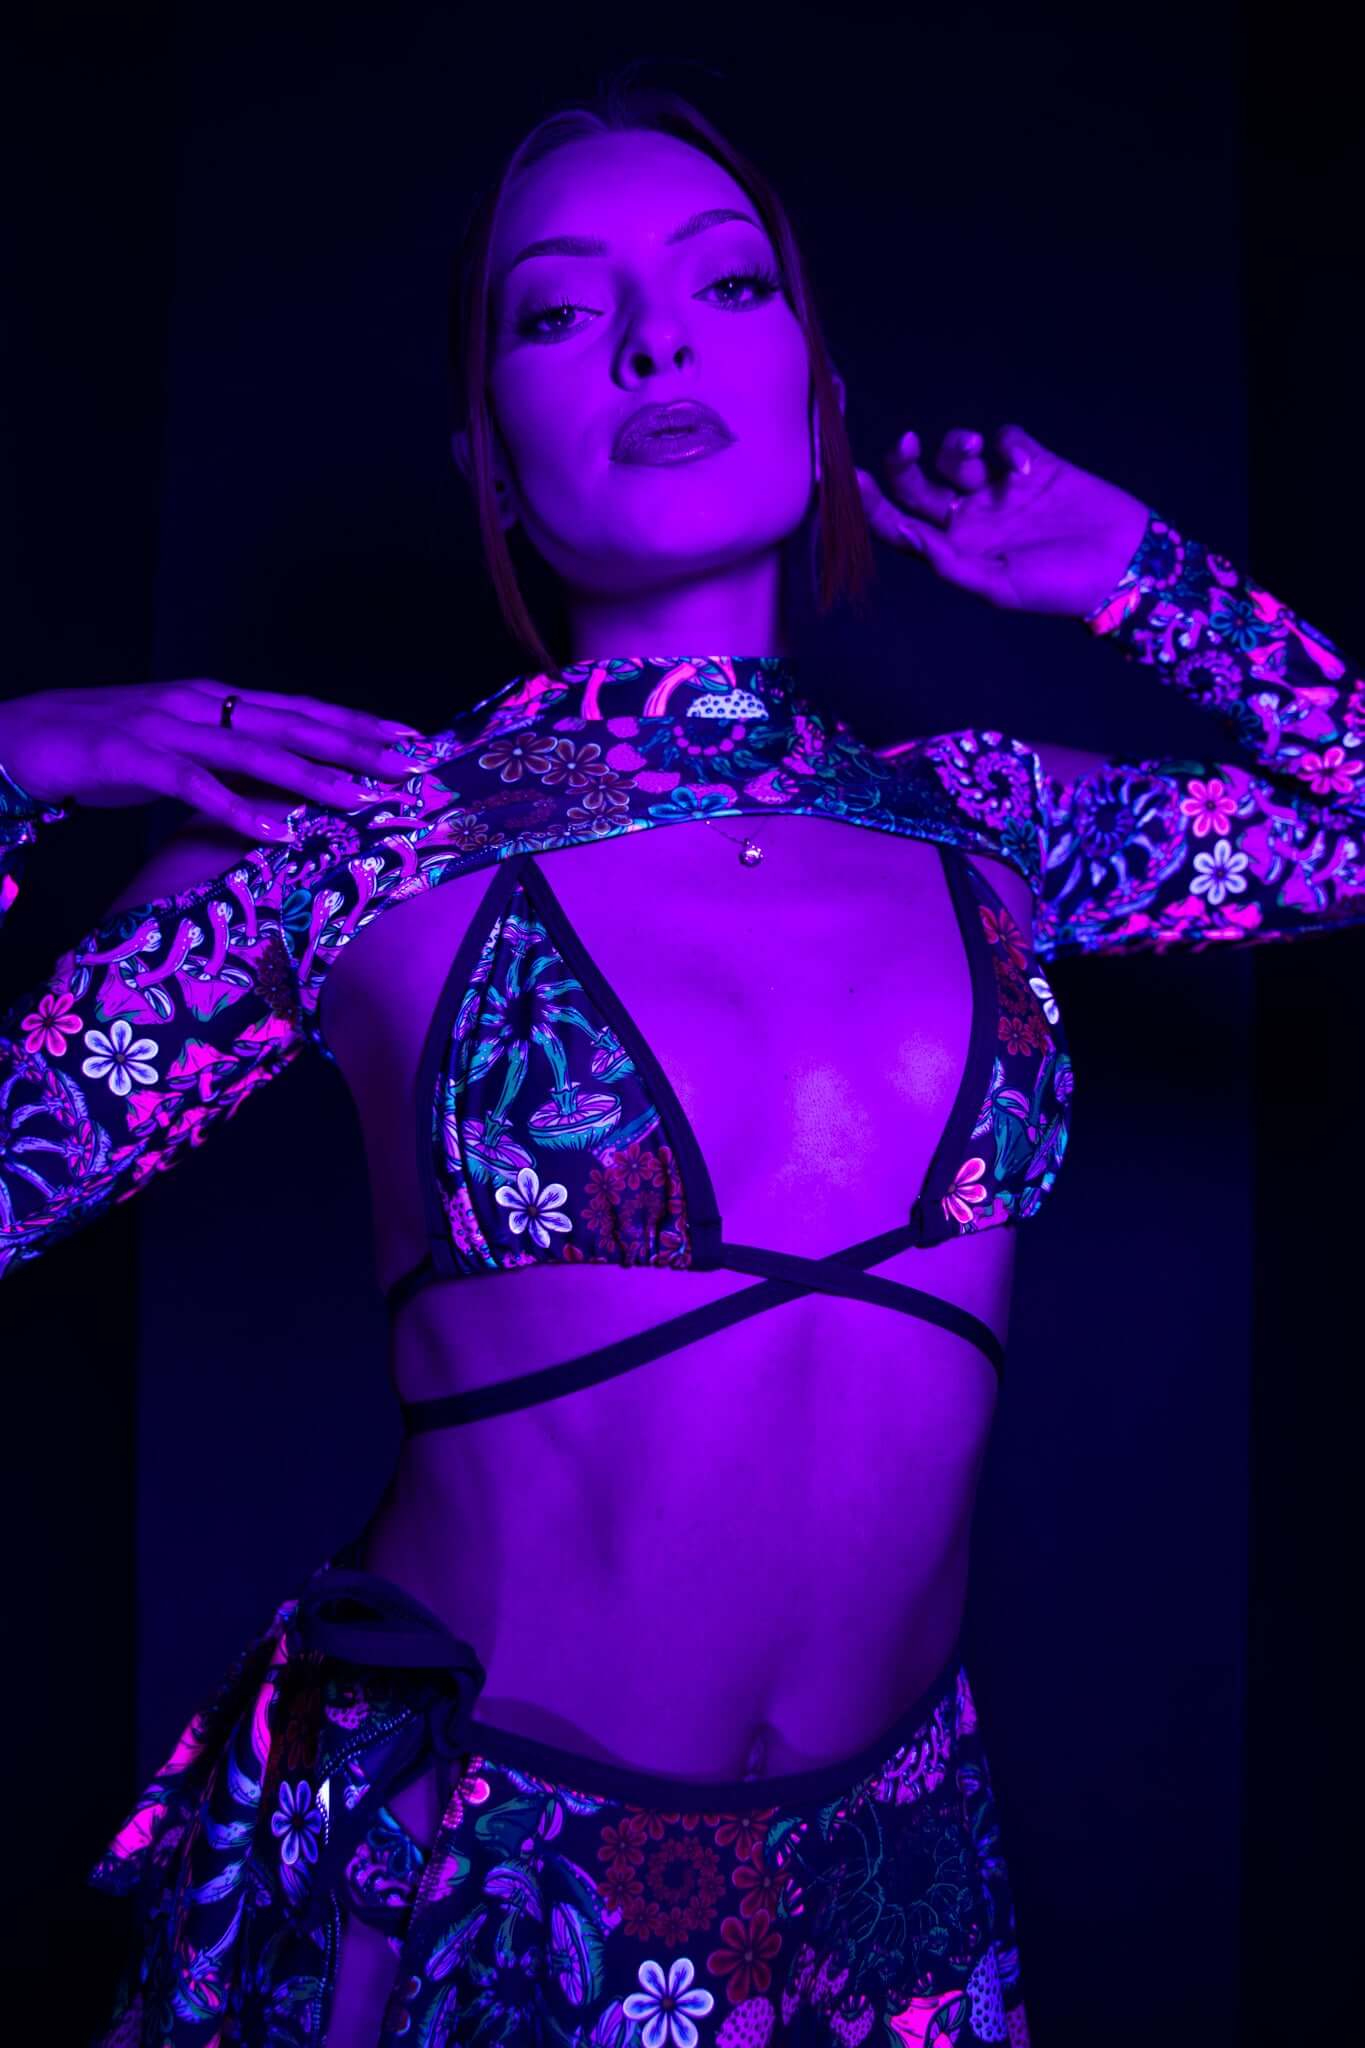 Model in Freedom Rave Wear's psychedelic print bikini top and skirt, accented by crisscross straps and purple lighting, exuding bold rave style.